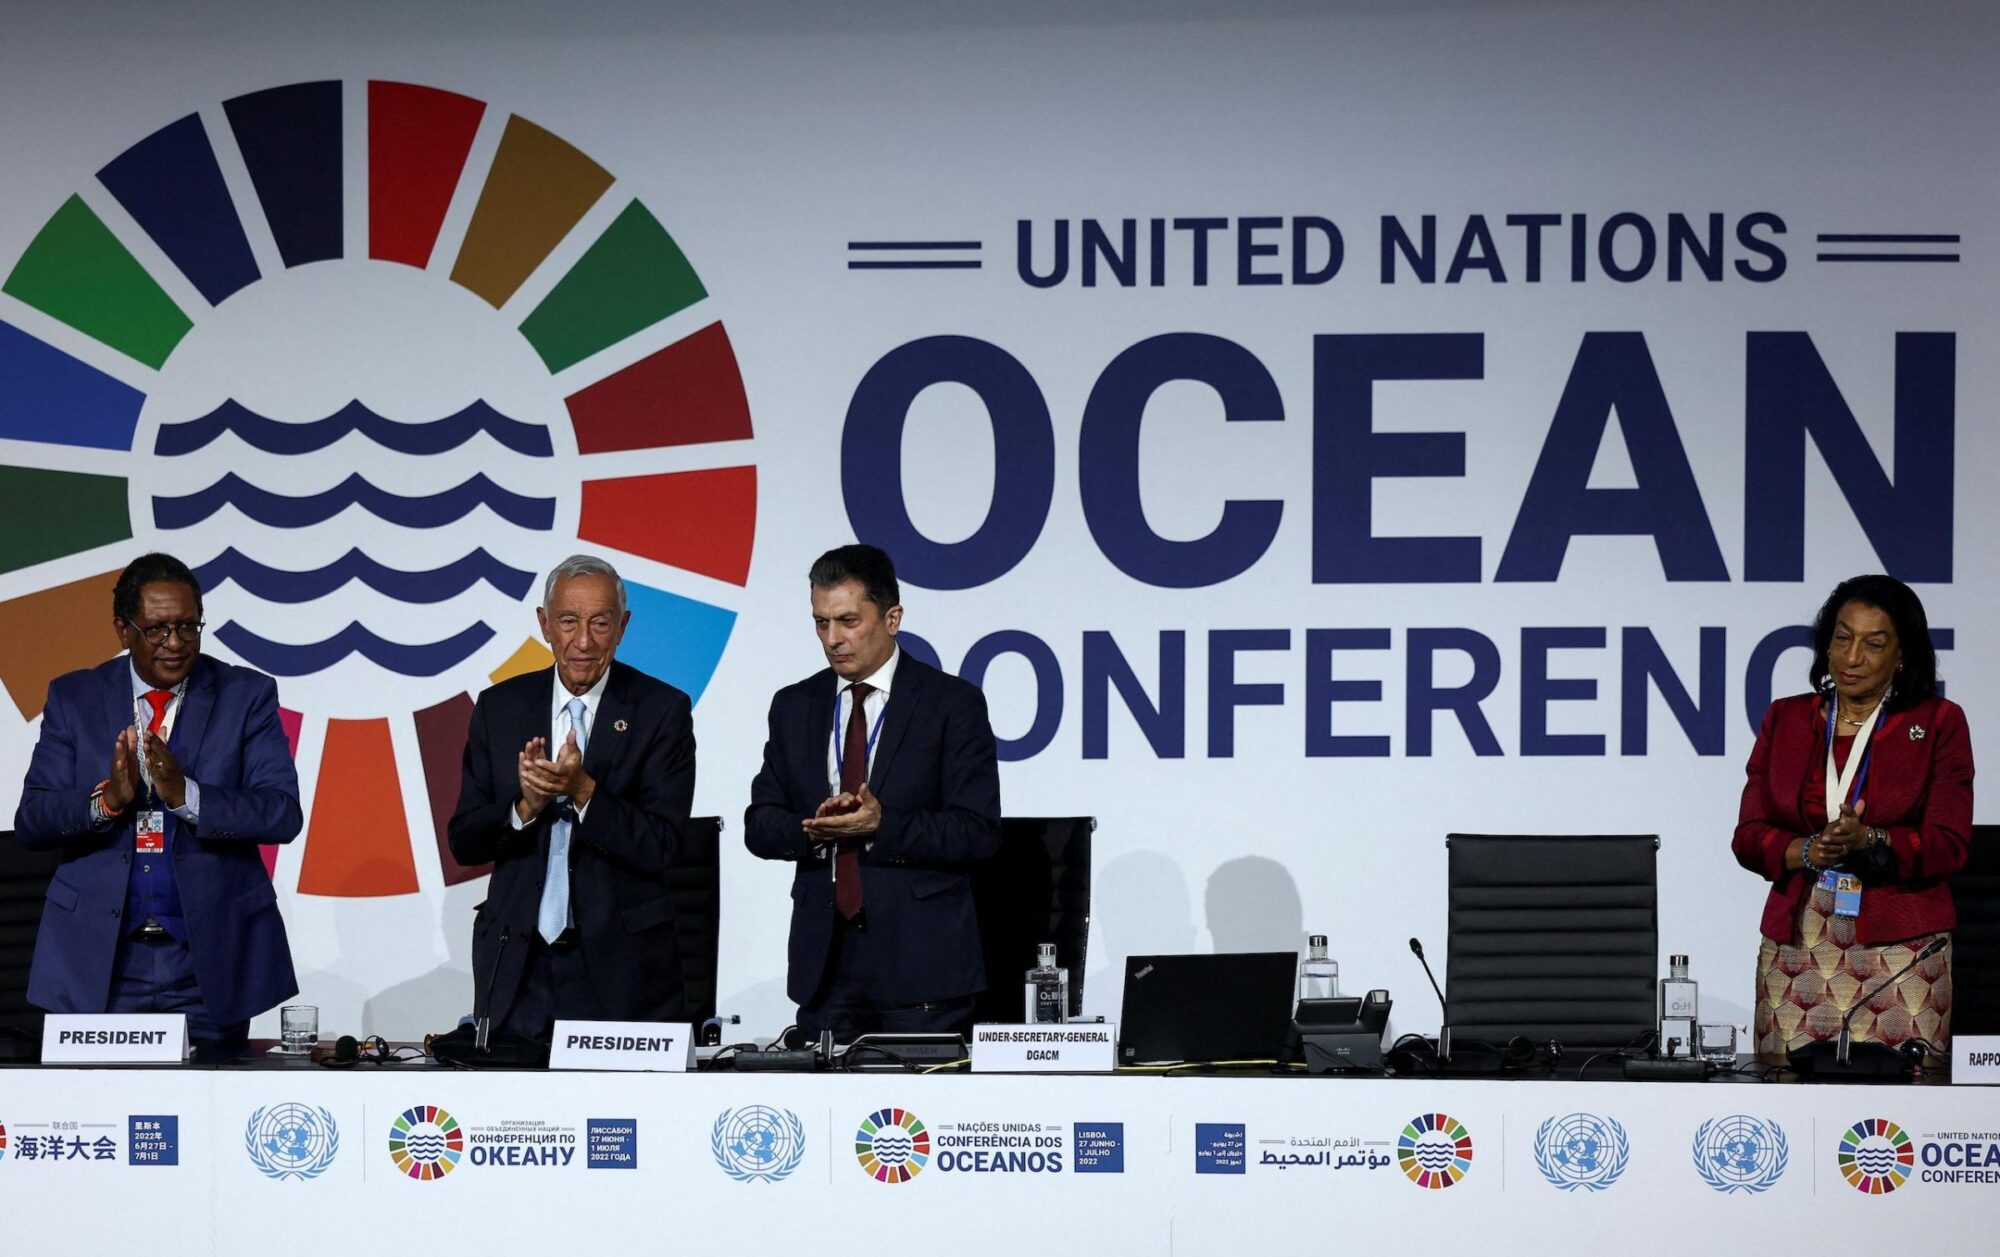 four people applaud standing in front of a banner that reads "oceans conference".